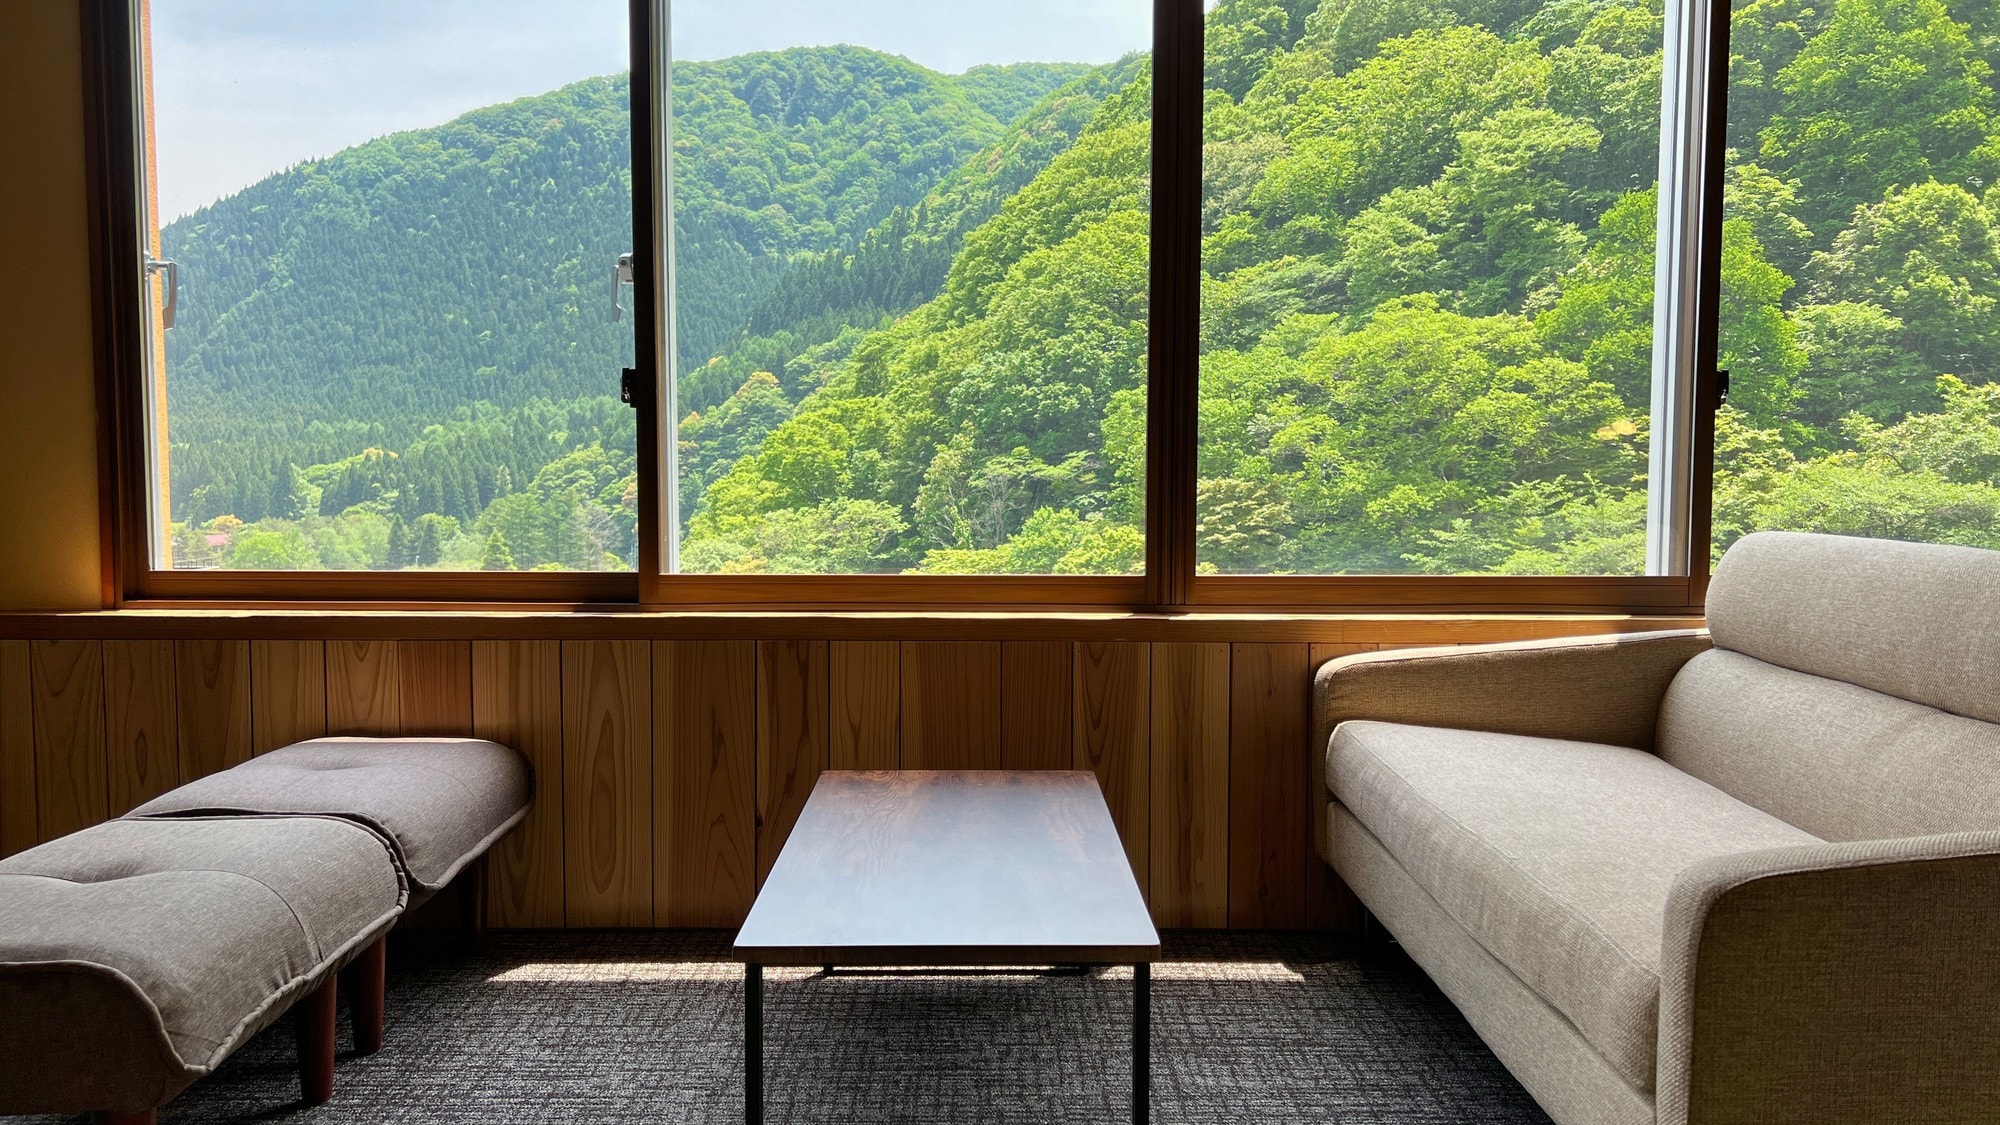 Image of staying in a standard Japanese-style bedroom